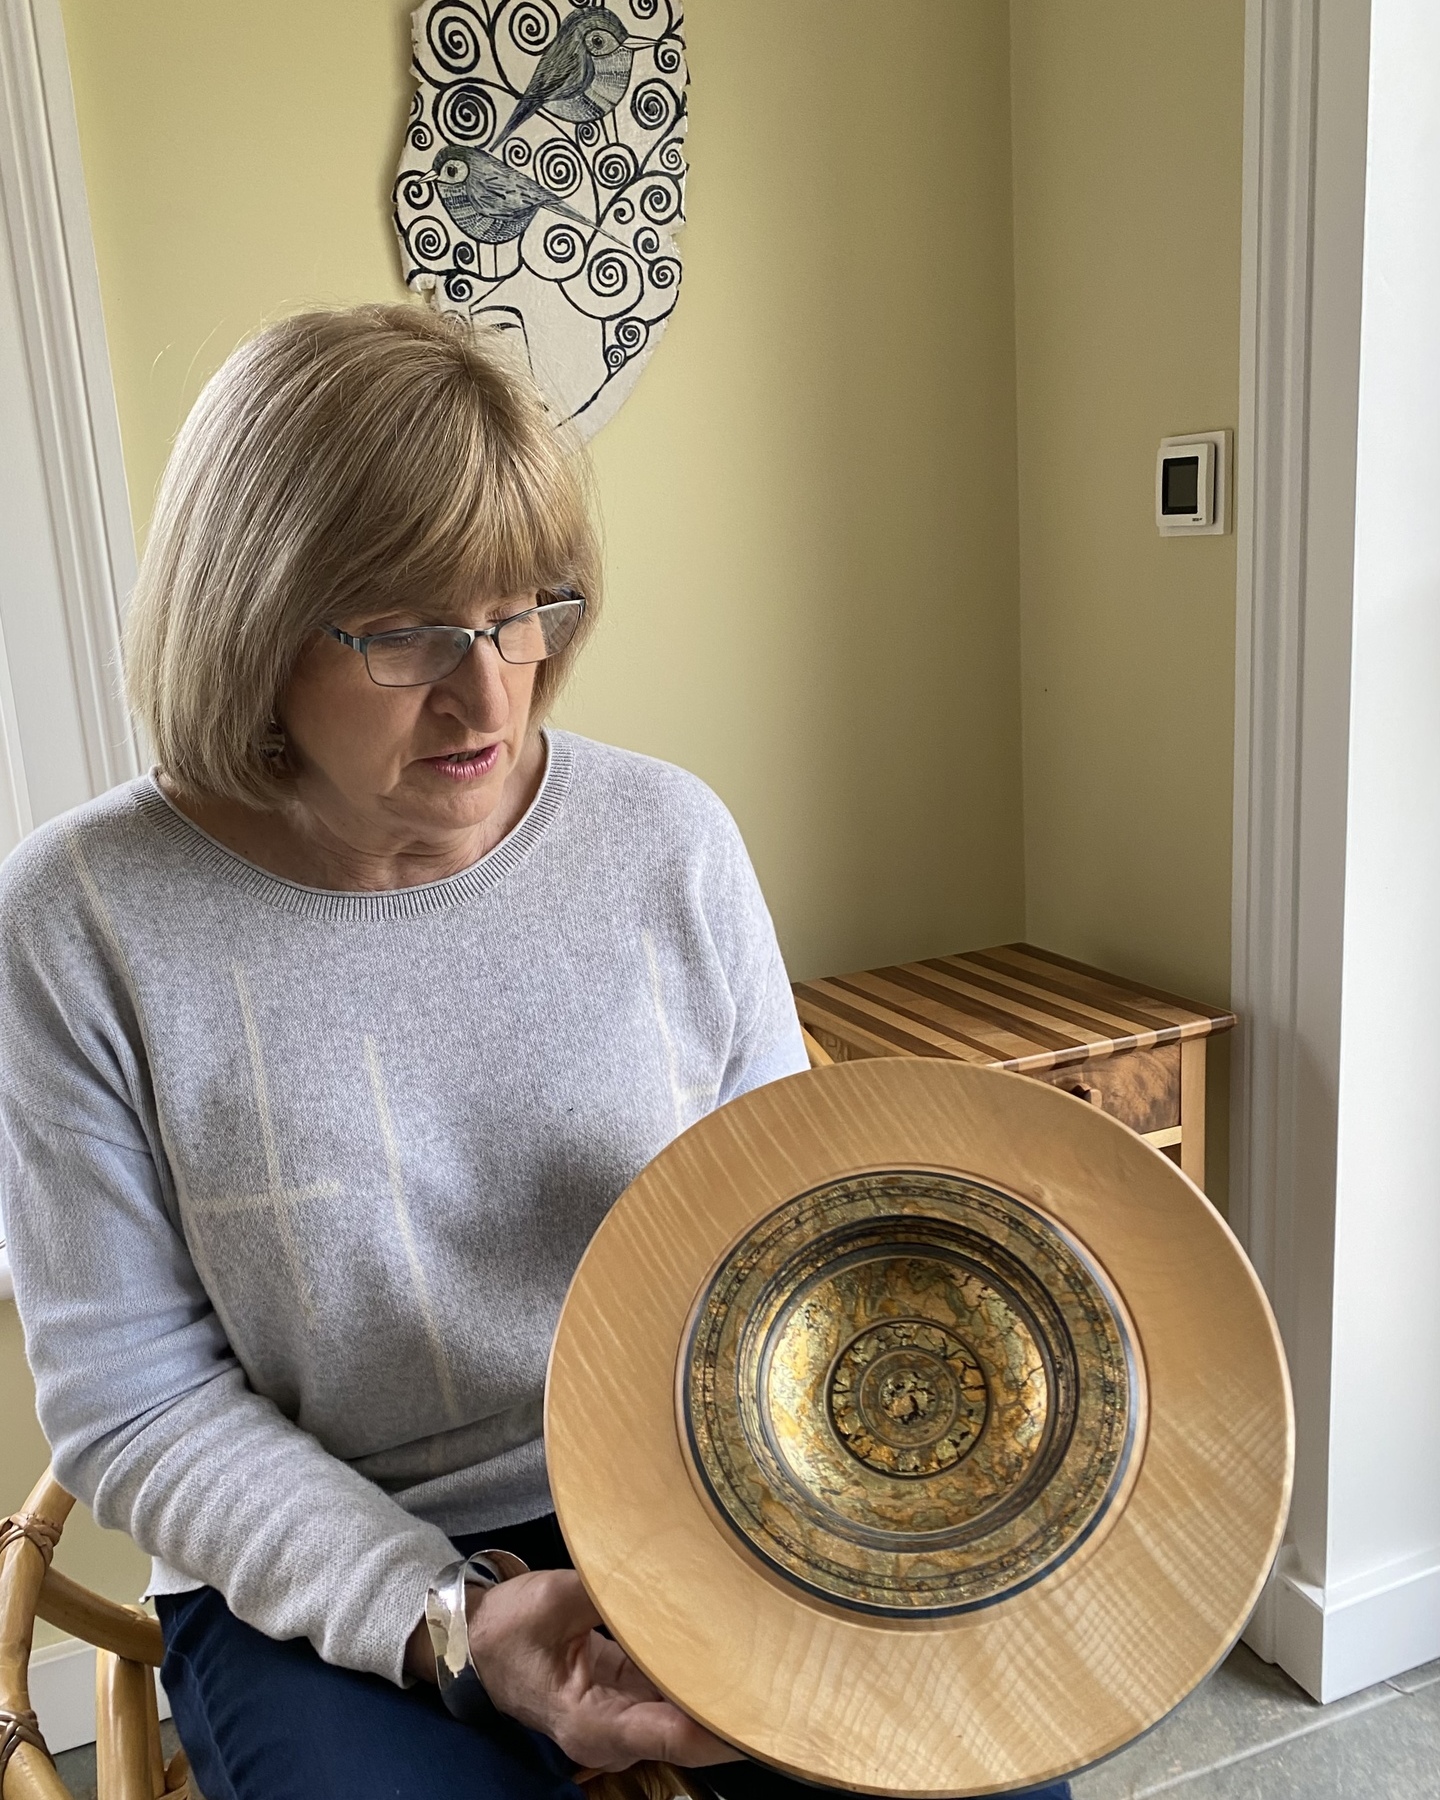 Sarah holding a plate by Dennis Hales, with furniture by Niall Craig and a plaque by former member Karen Risby in the background